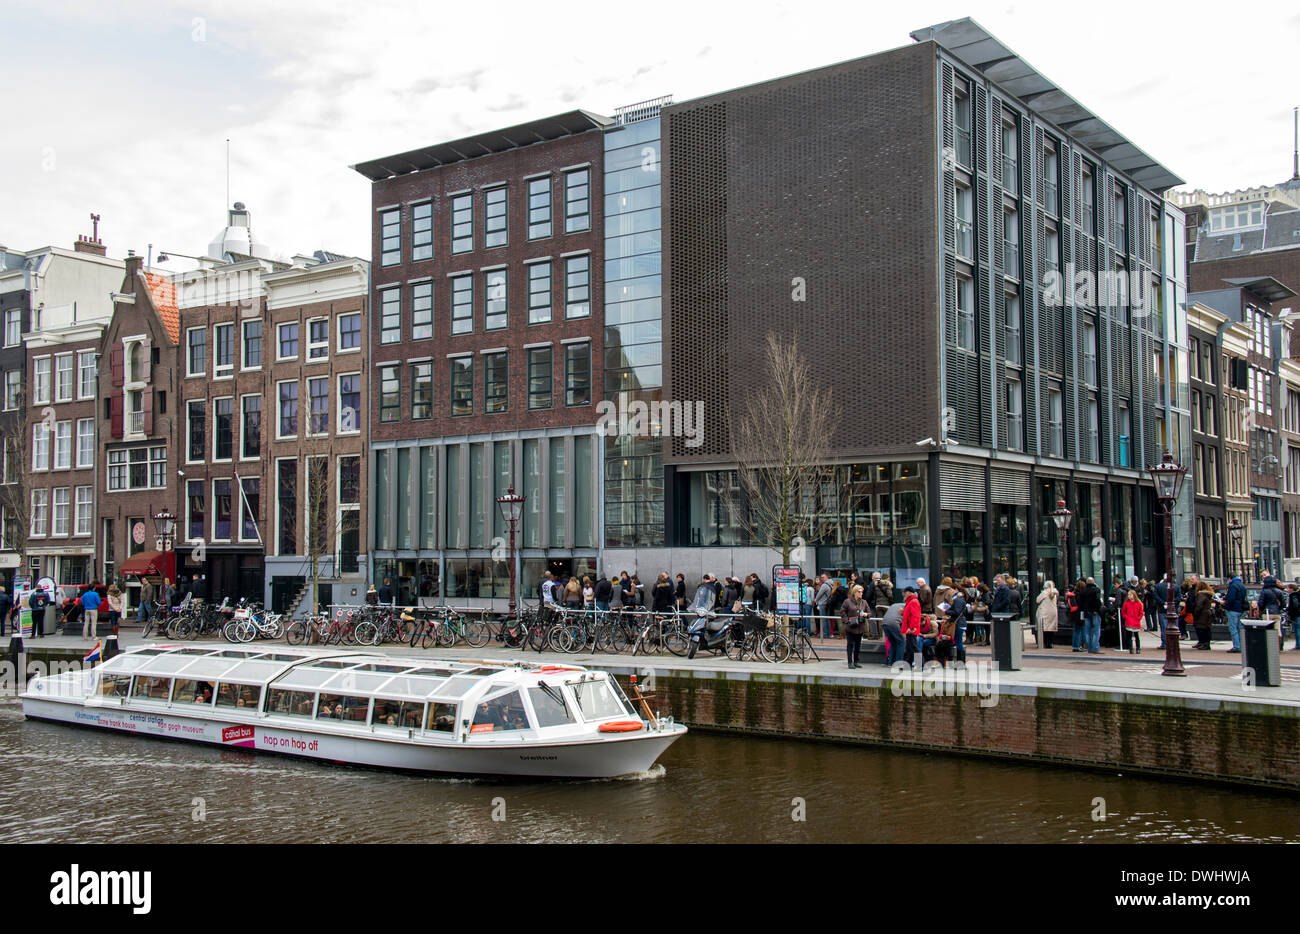 Exterior of Anne Frank House museum in Amsterdam with tourists and canal boat Stock Photo